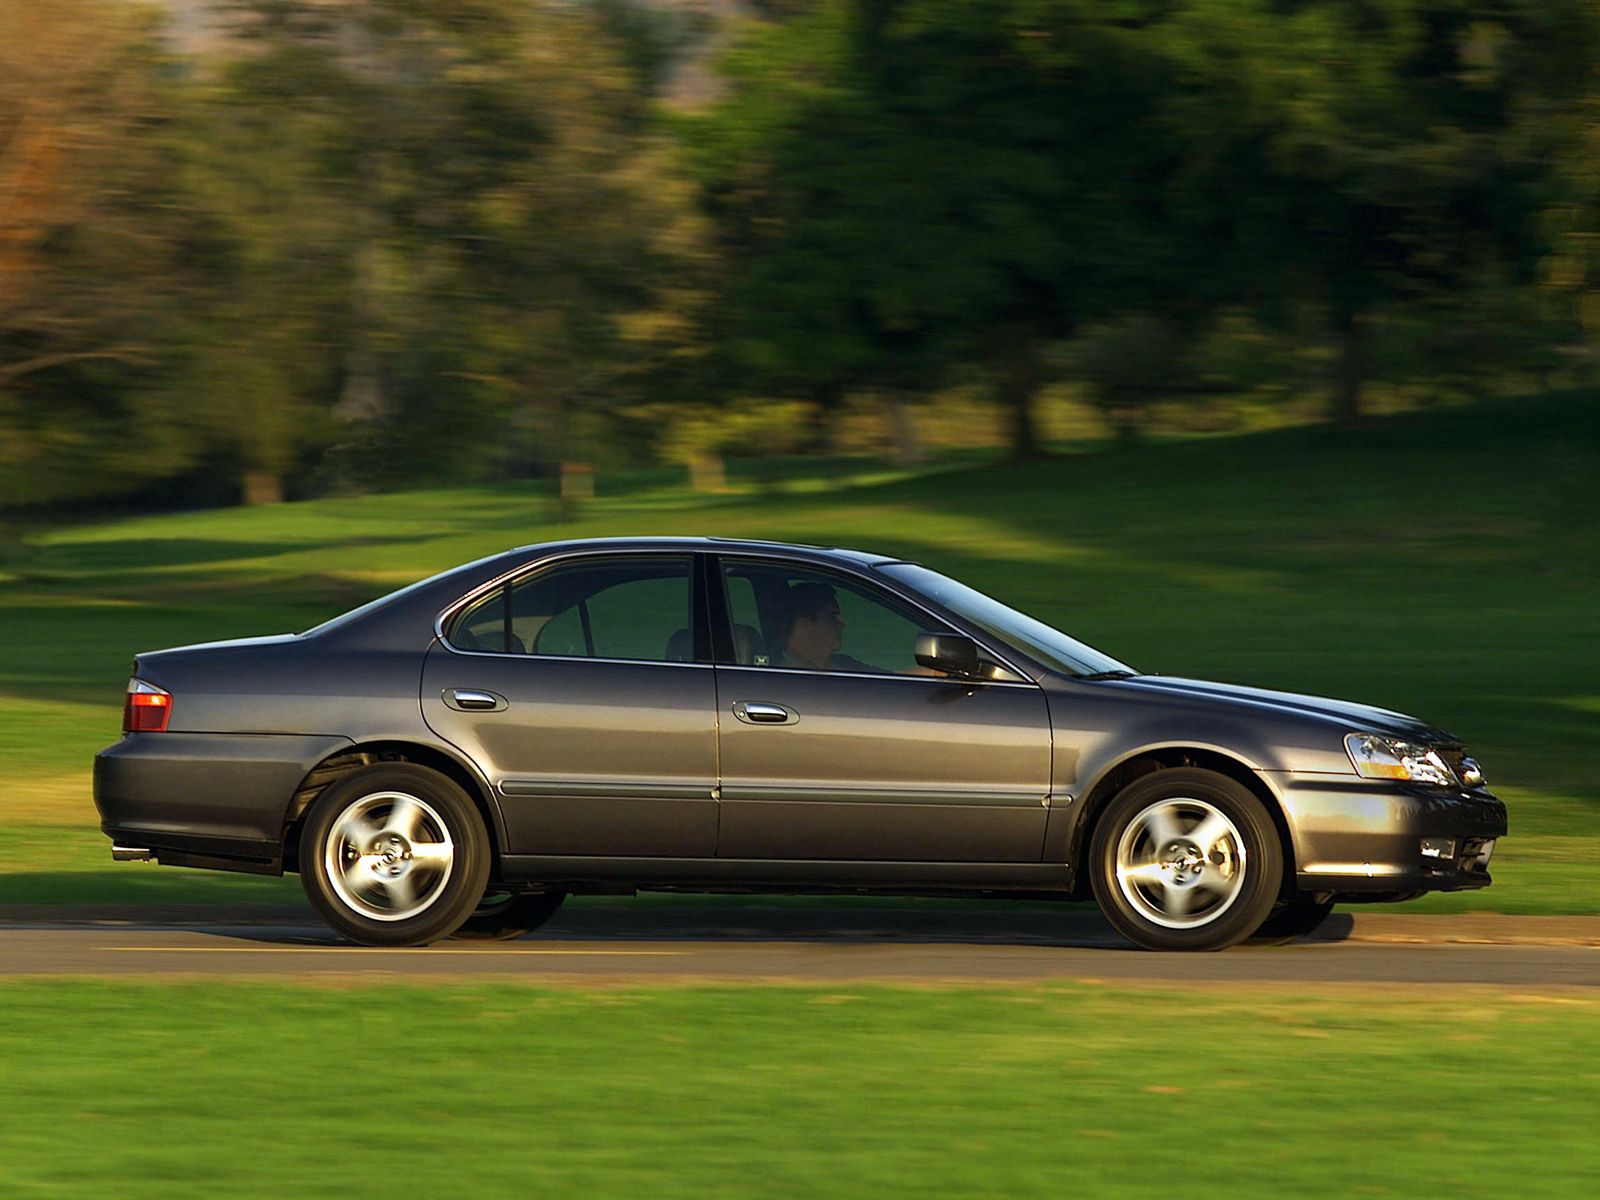 wallpapers auto, nature, trees, grass, acura, cars, blue, side view, speed, style, akura, tl, 2002